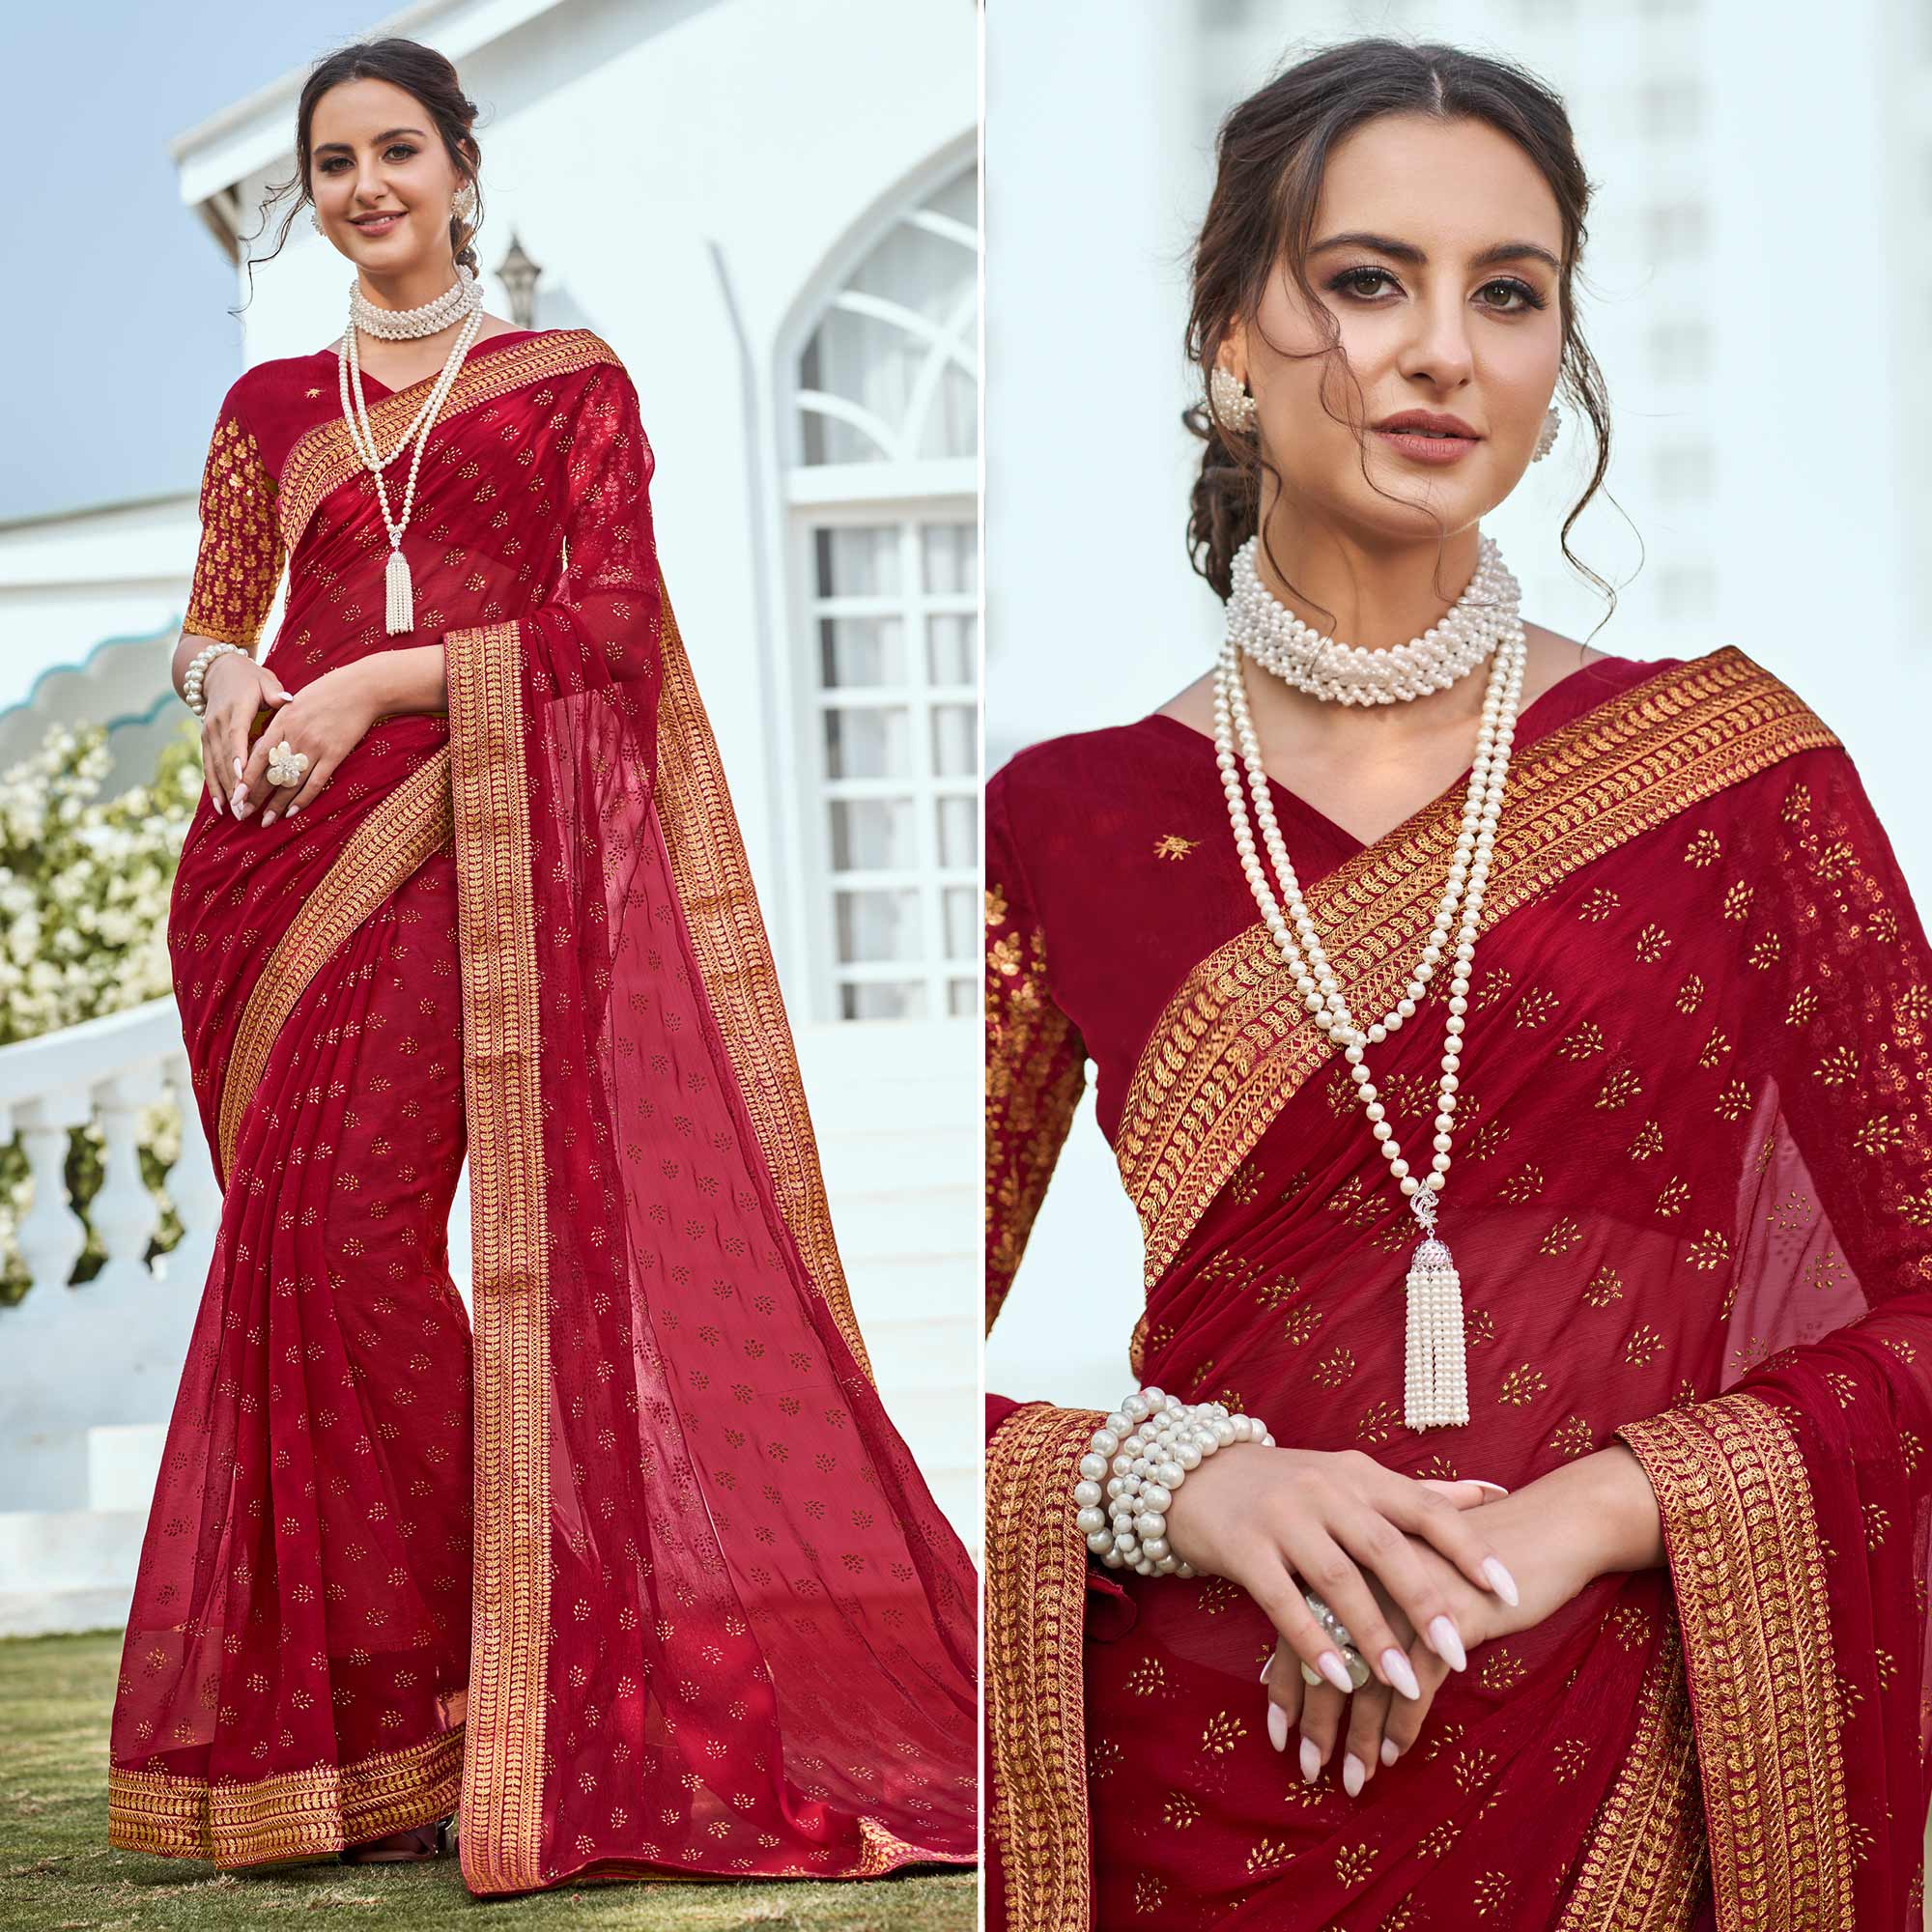 Maroon Foil Printed Georgette Saree With Embroidered Border